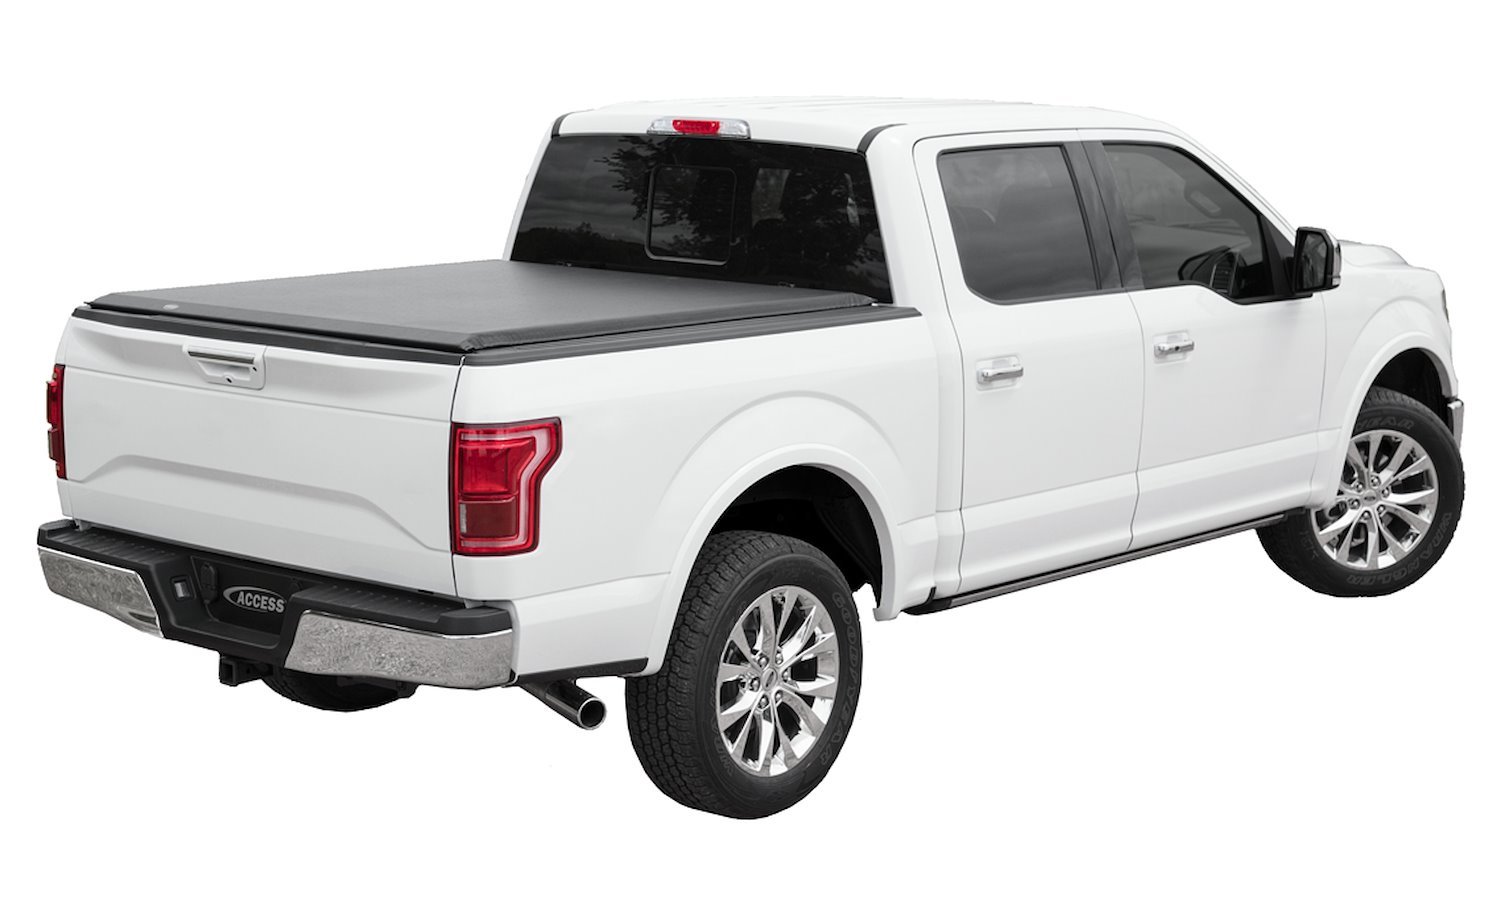 Original Roll-Up Tonneau Cover, Fits Select Ford F-150, with 6 ft. 6 in. Bed